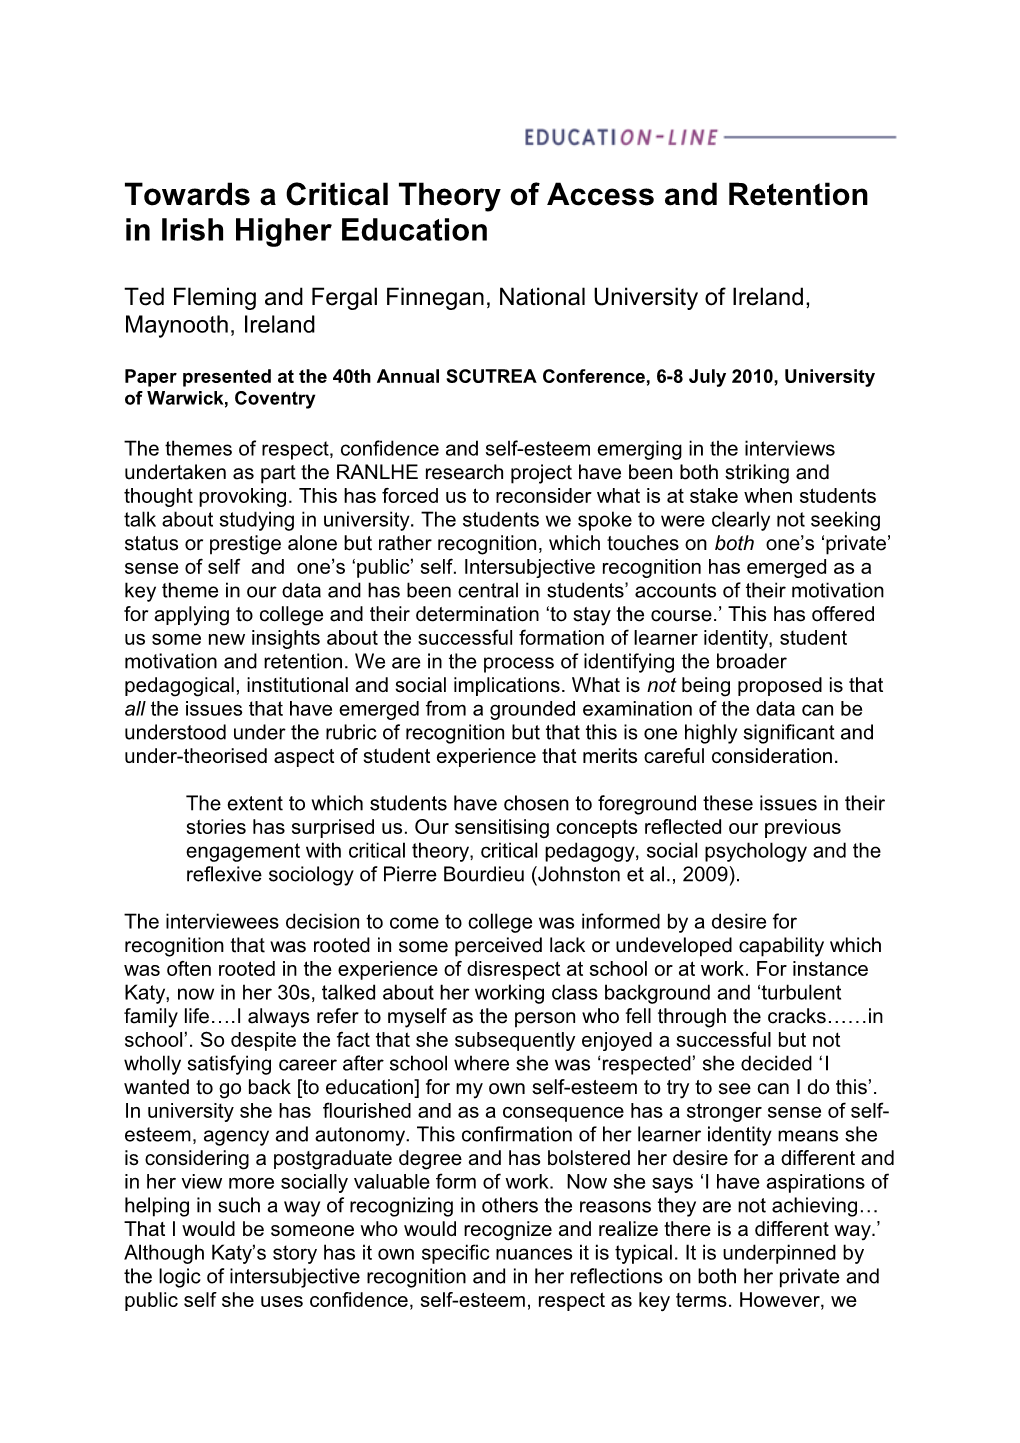 Towards a Critical Theory of Access and Retention in Irish Higher Education